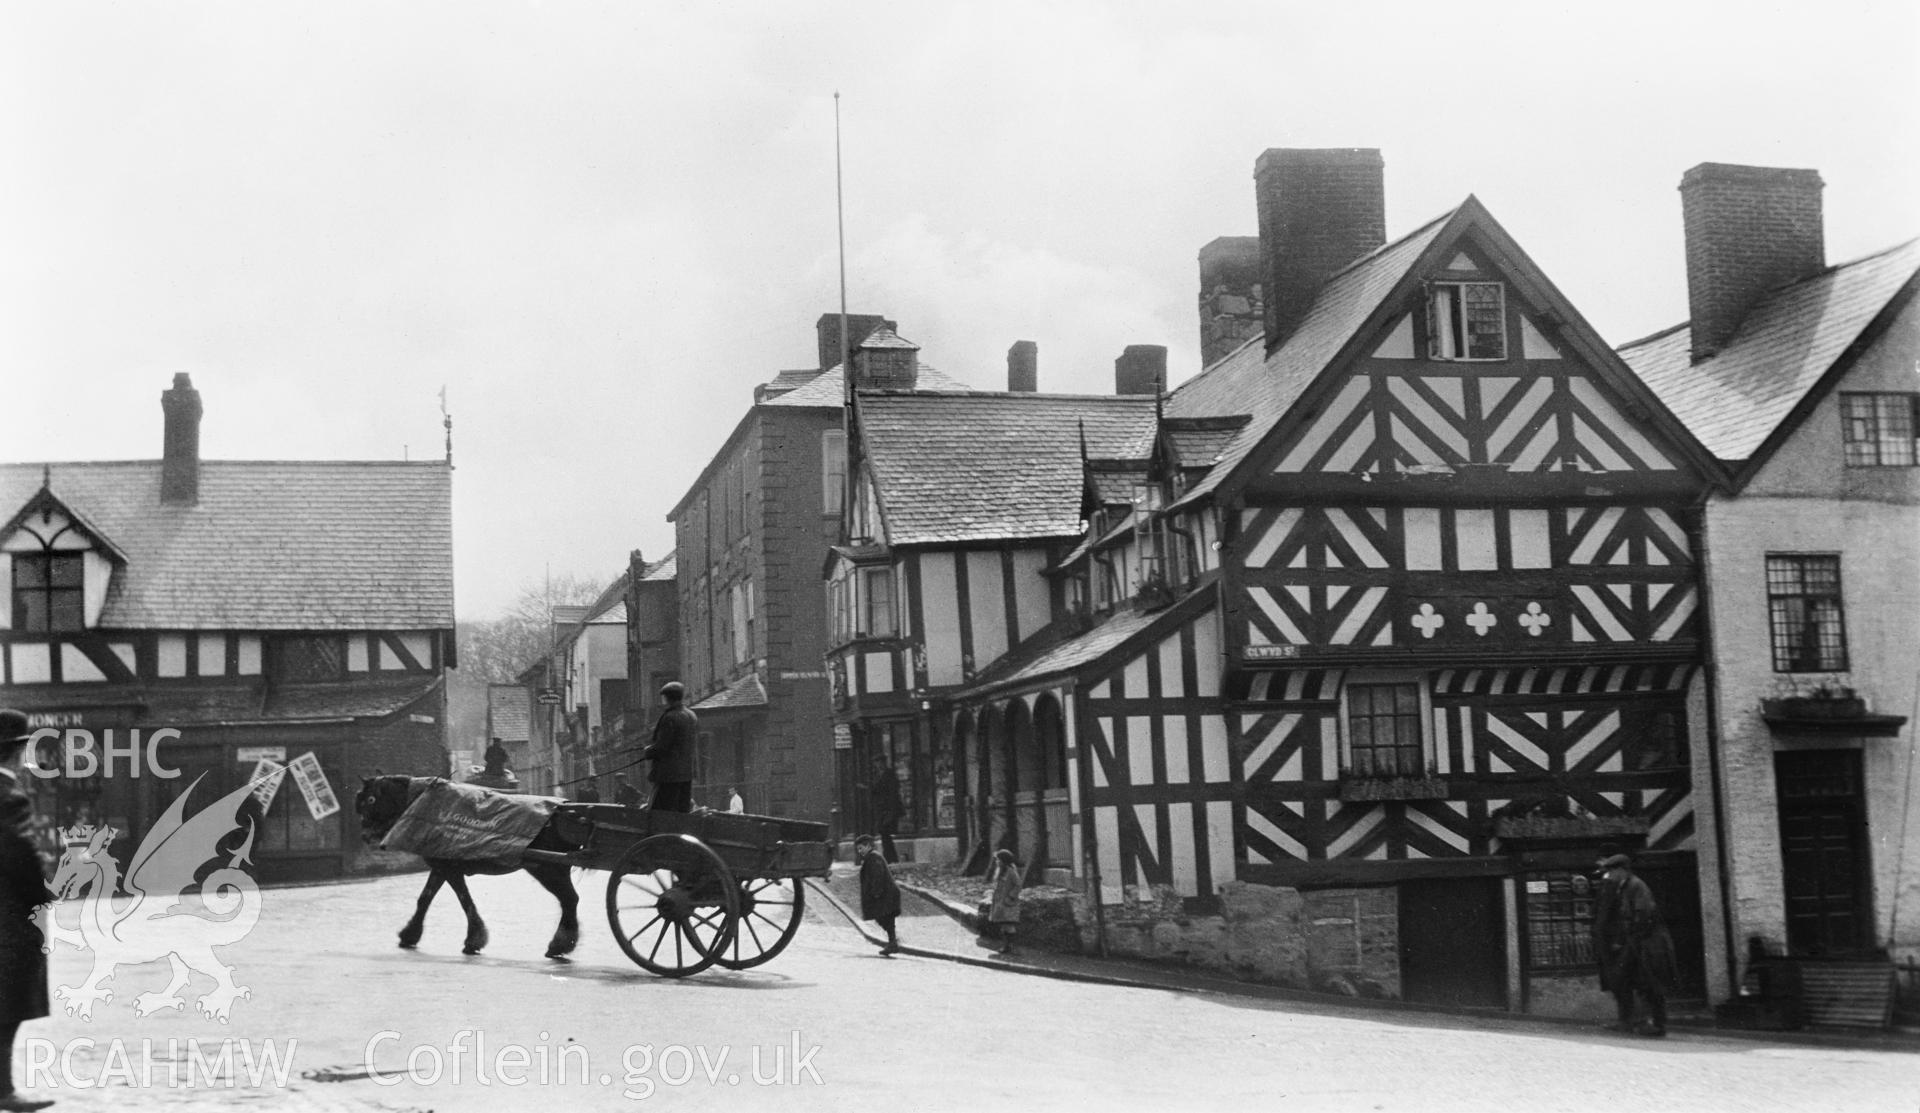 Black and white print of Barclays Bank, Ruthin. Undated but probably taken early C20 before the total reconstruction.